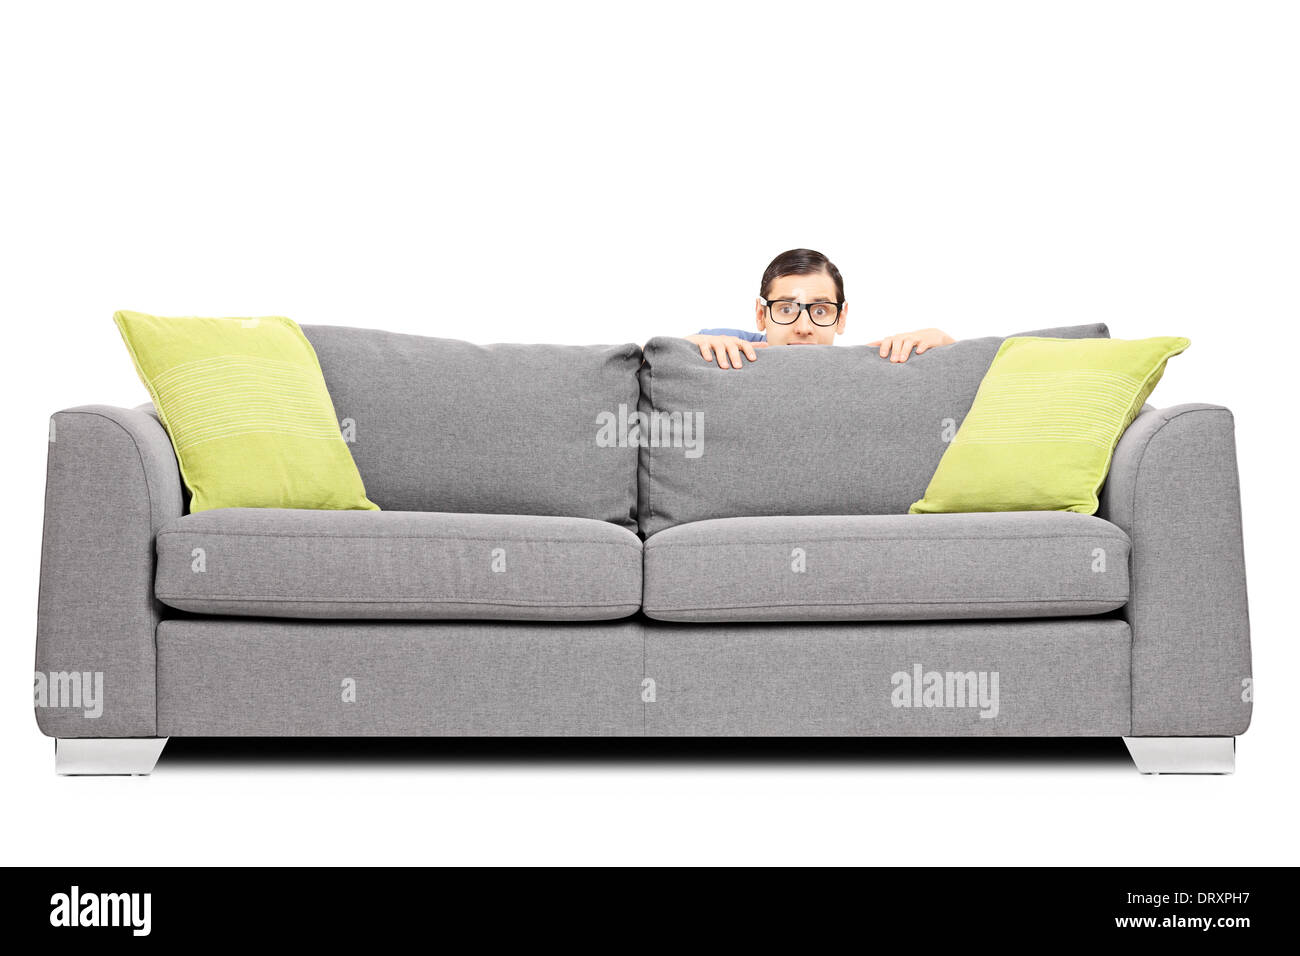 Frightened man hiding behind a sofa isolated on white background Stock Photo